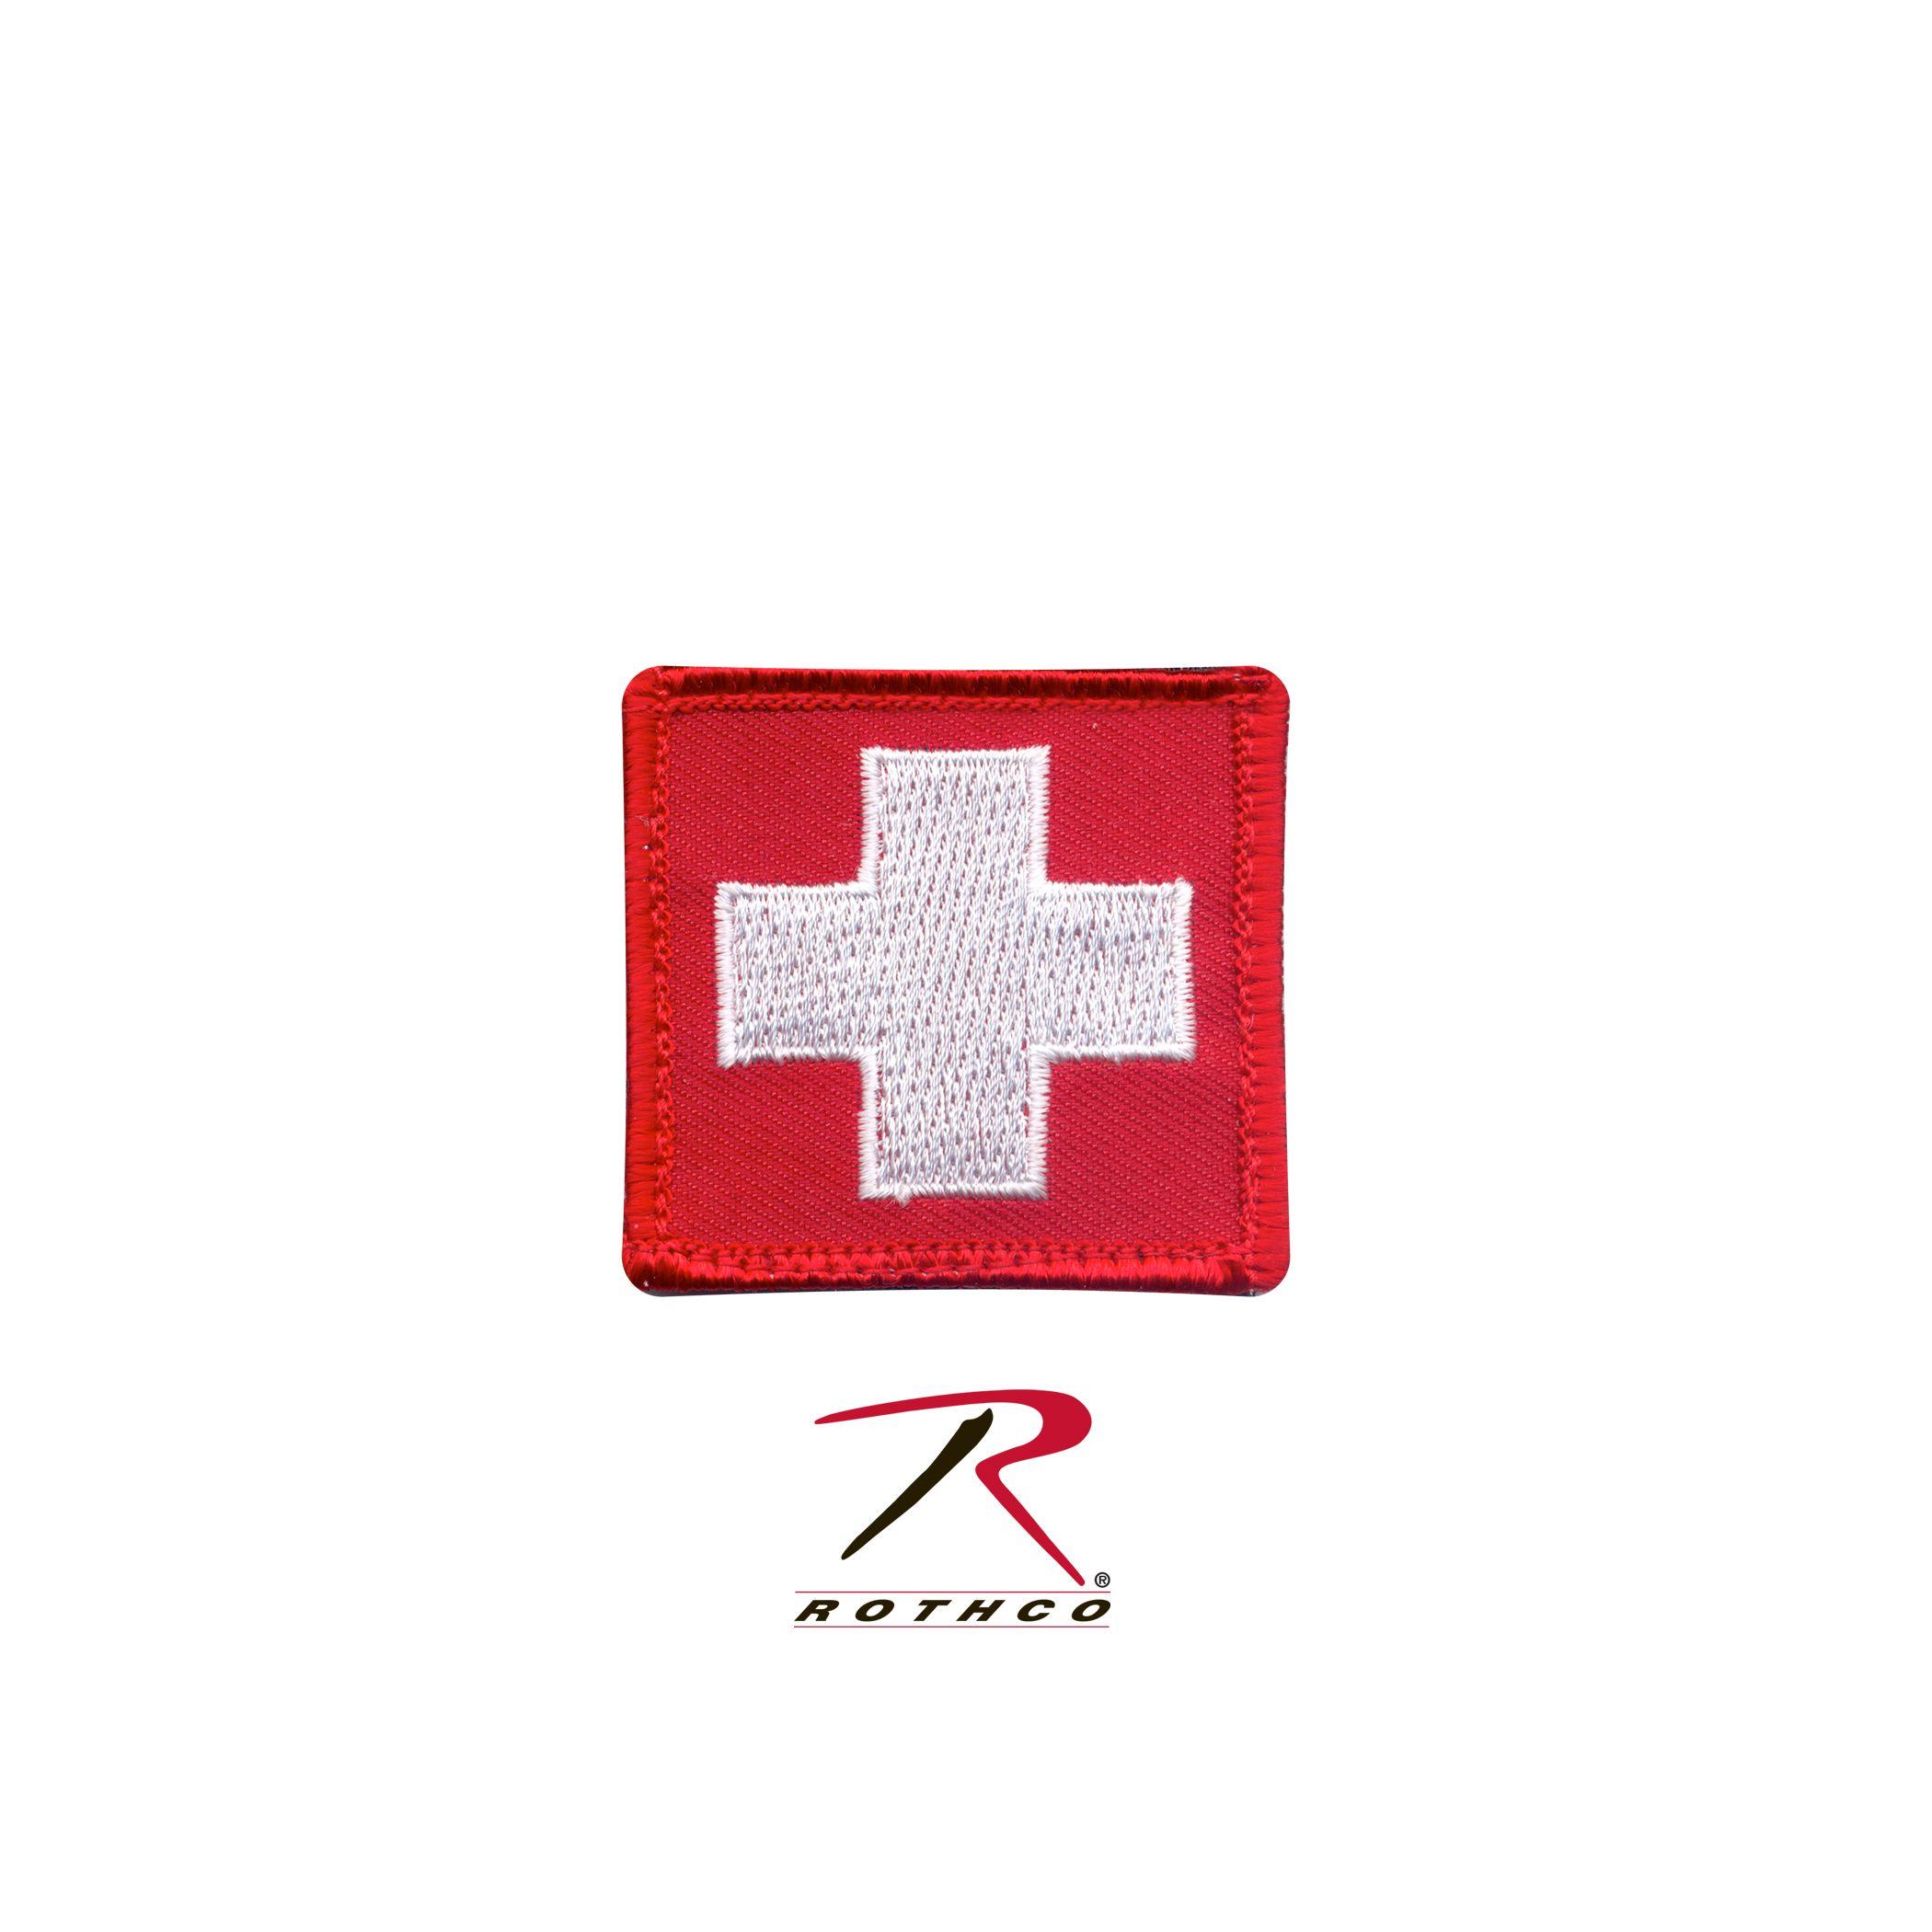 Red and White Company Logo - Red square white cross Logos